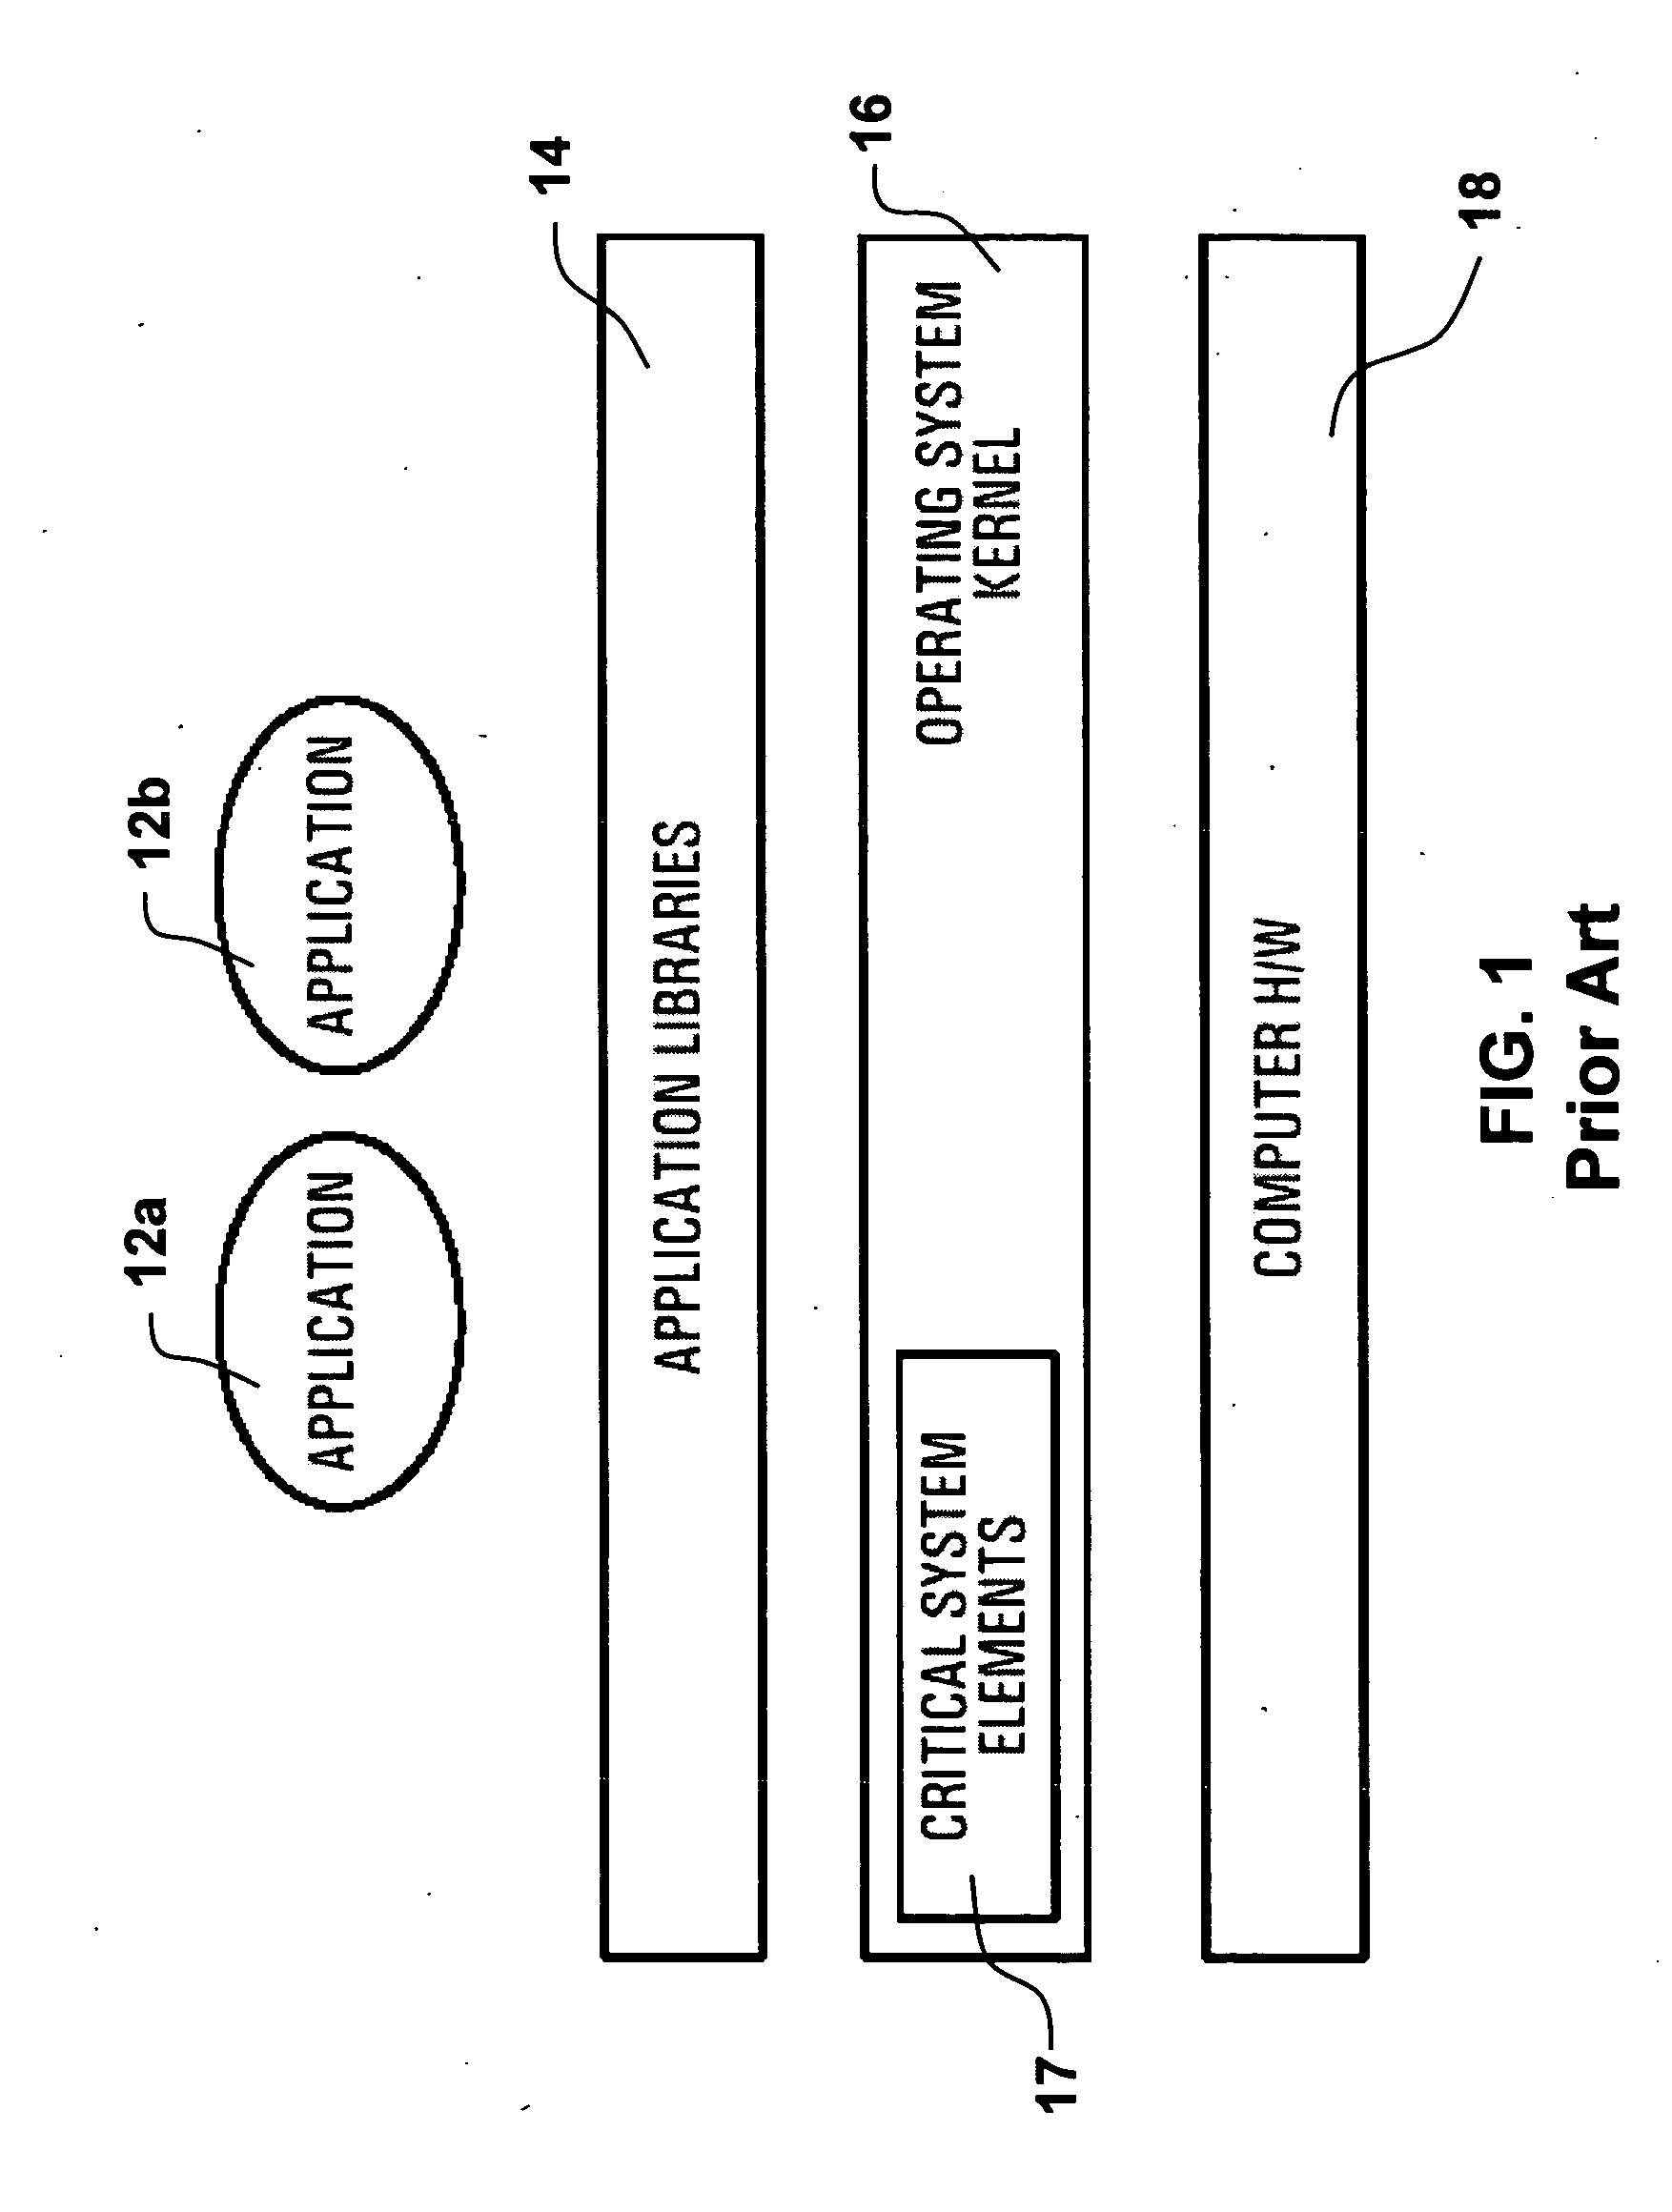 Computing system having user mode critical system elements as shared libraries